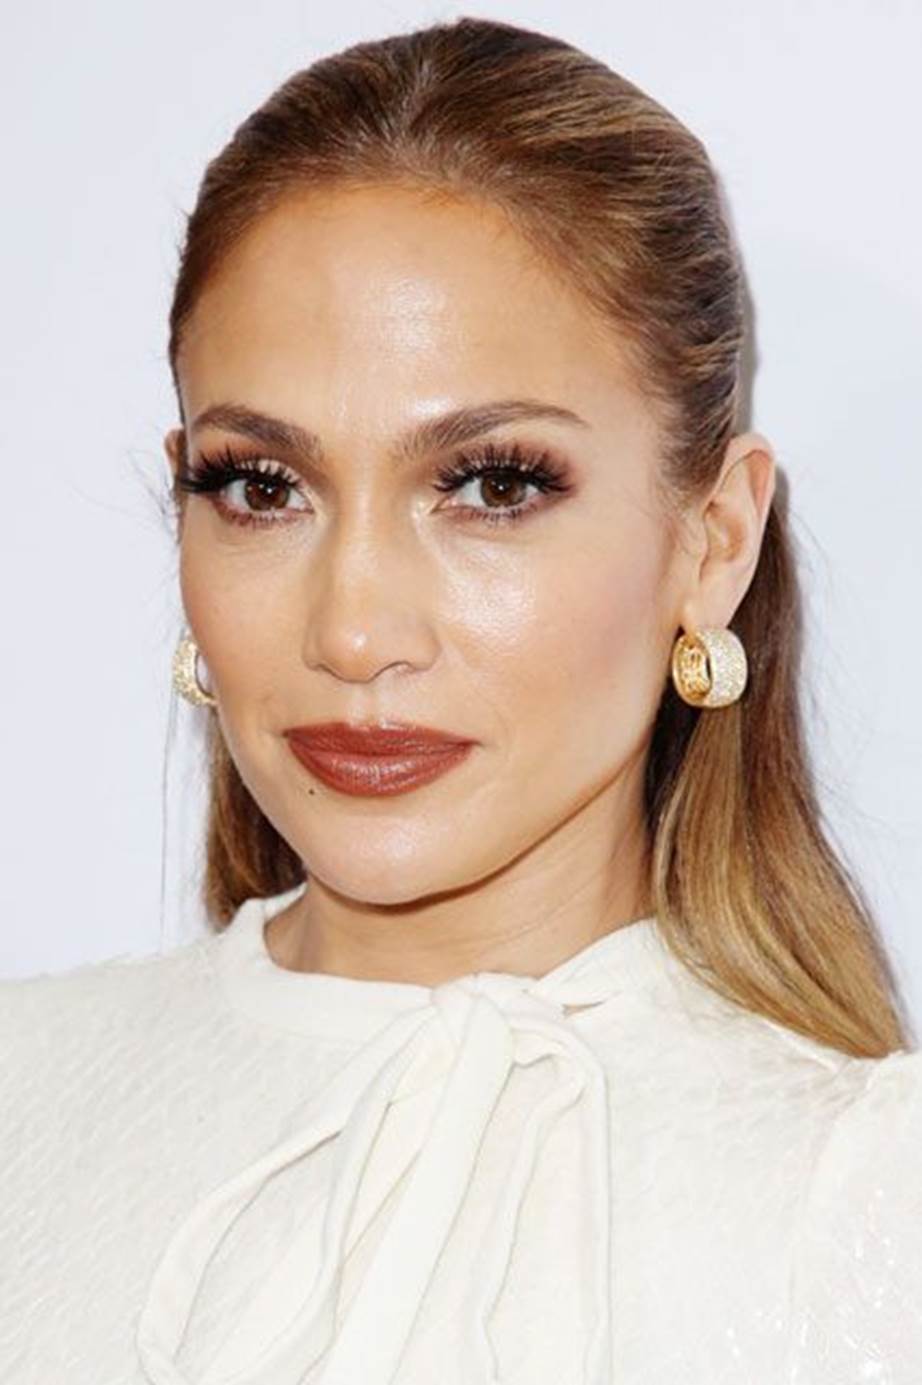 JLo attended a premiere in 2016 sporting her go-to bronze smokey eye and nude glossy lips